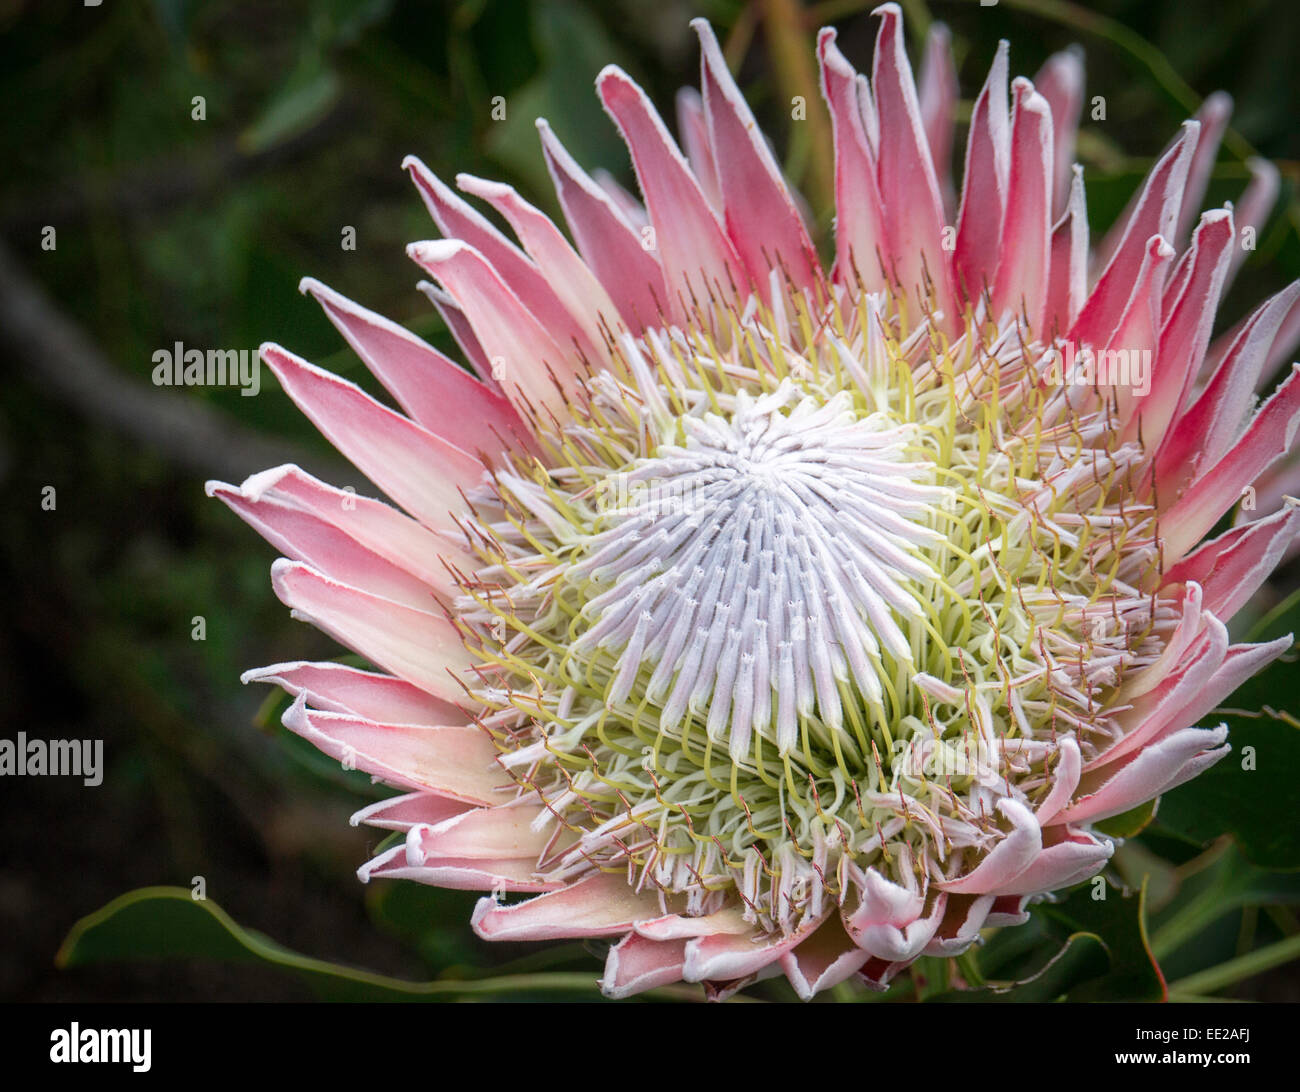 Protea flowers in Kirstenbosch Botanic Gardens, Cape Town, South Africa. The protea is South Africa's national flower. Stock Photo